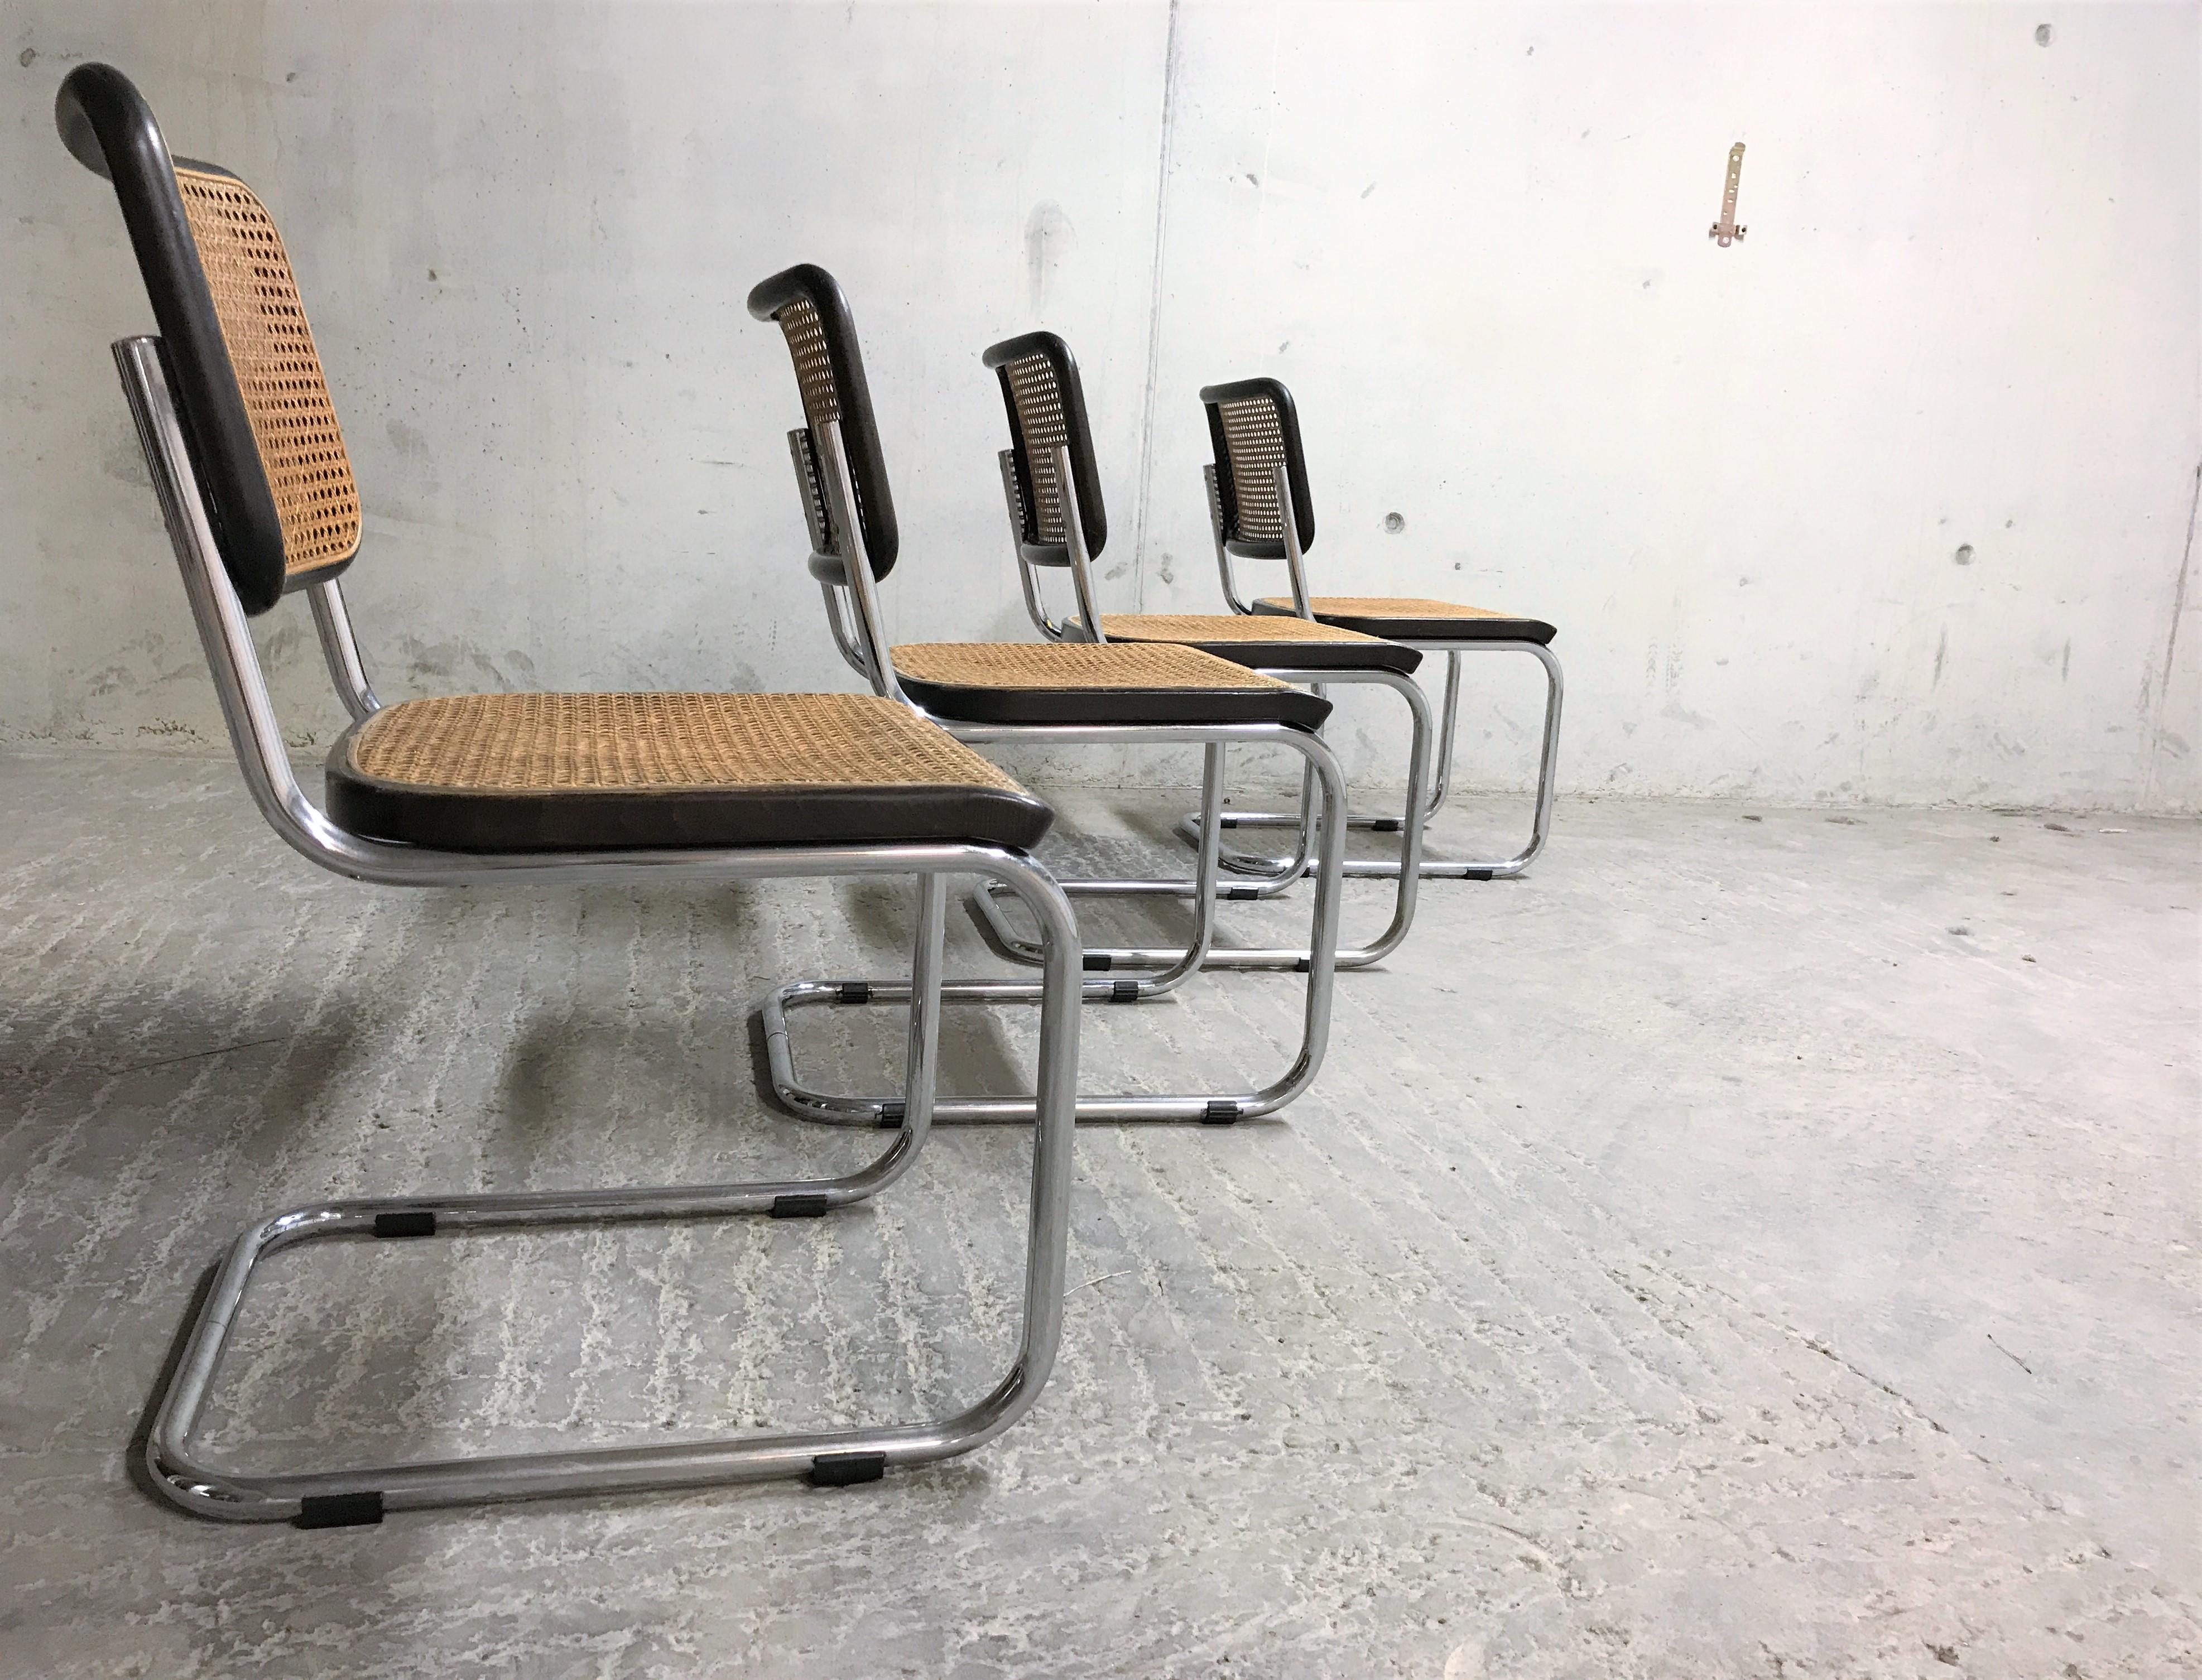 Set of 4 Marcel Breuer Bauhaus design chairs model B32. Original design dates from 1926.

Tubular chrome frame, cane seats and black lacquered wood.

Very good condition.

One of the chairs has some wear on the top of the backrest.

Stamped